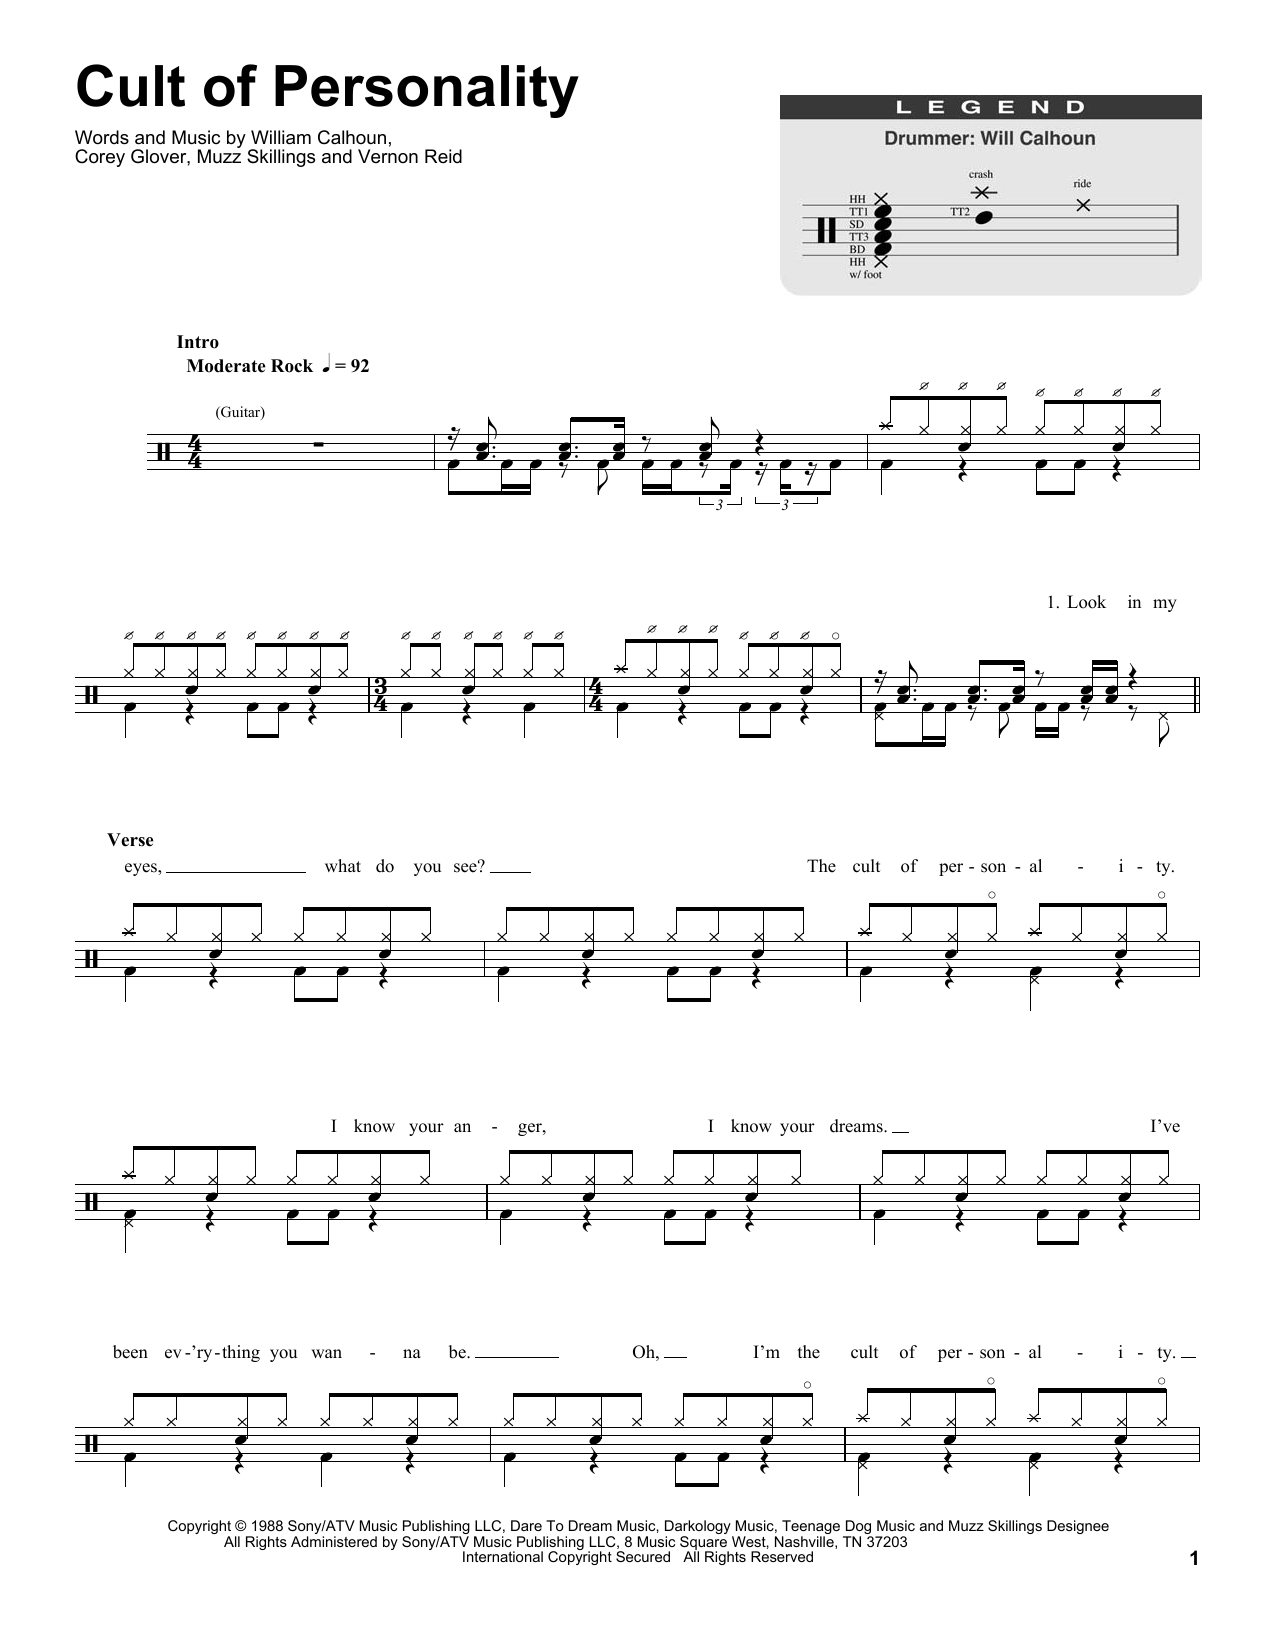 Download Living Colour Cult Of Personality Sheet Music